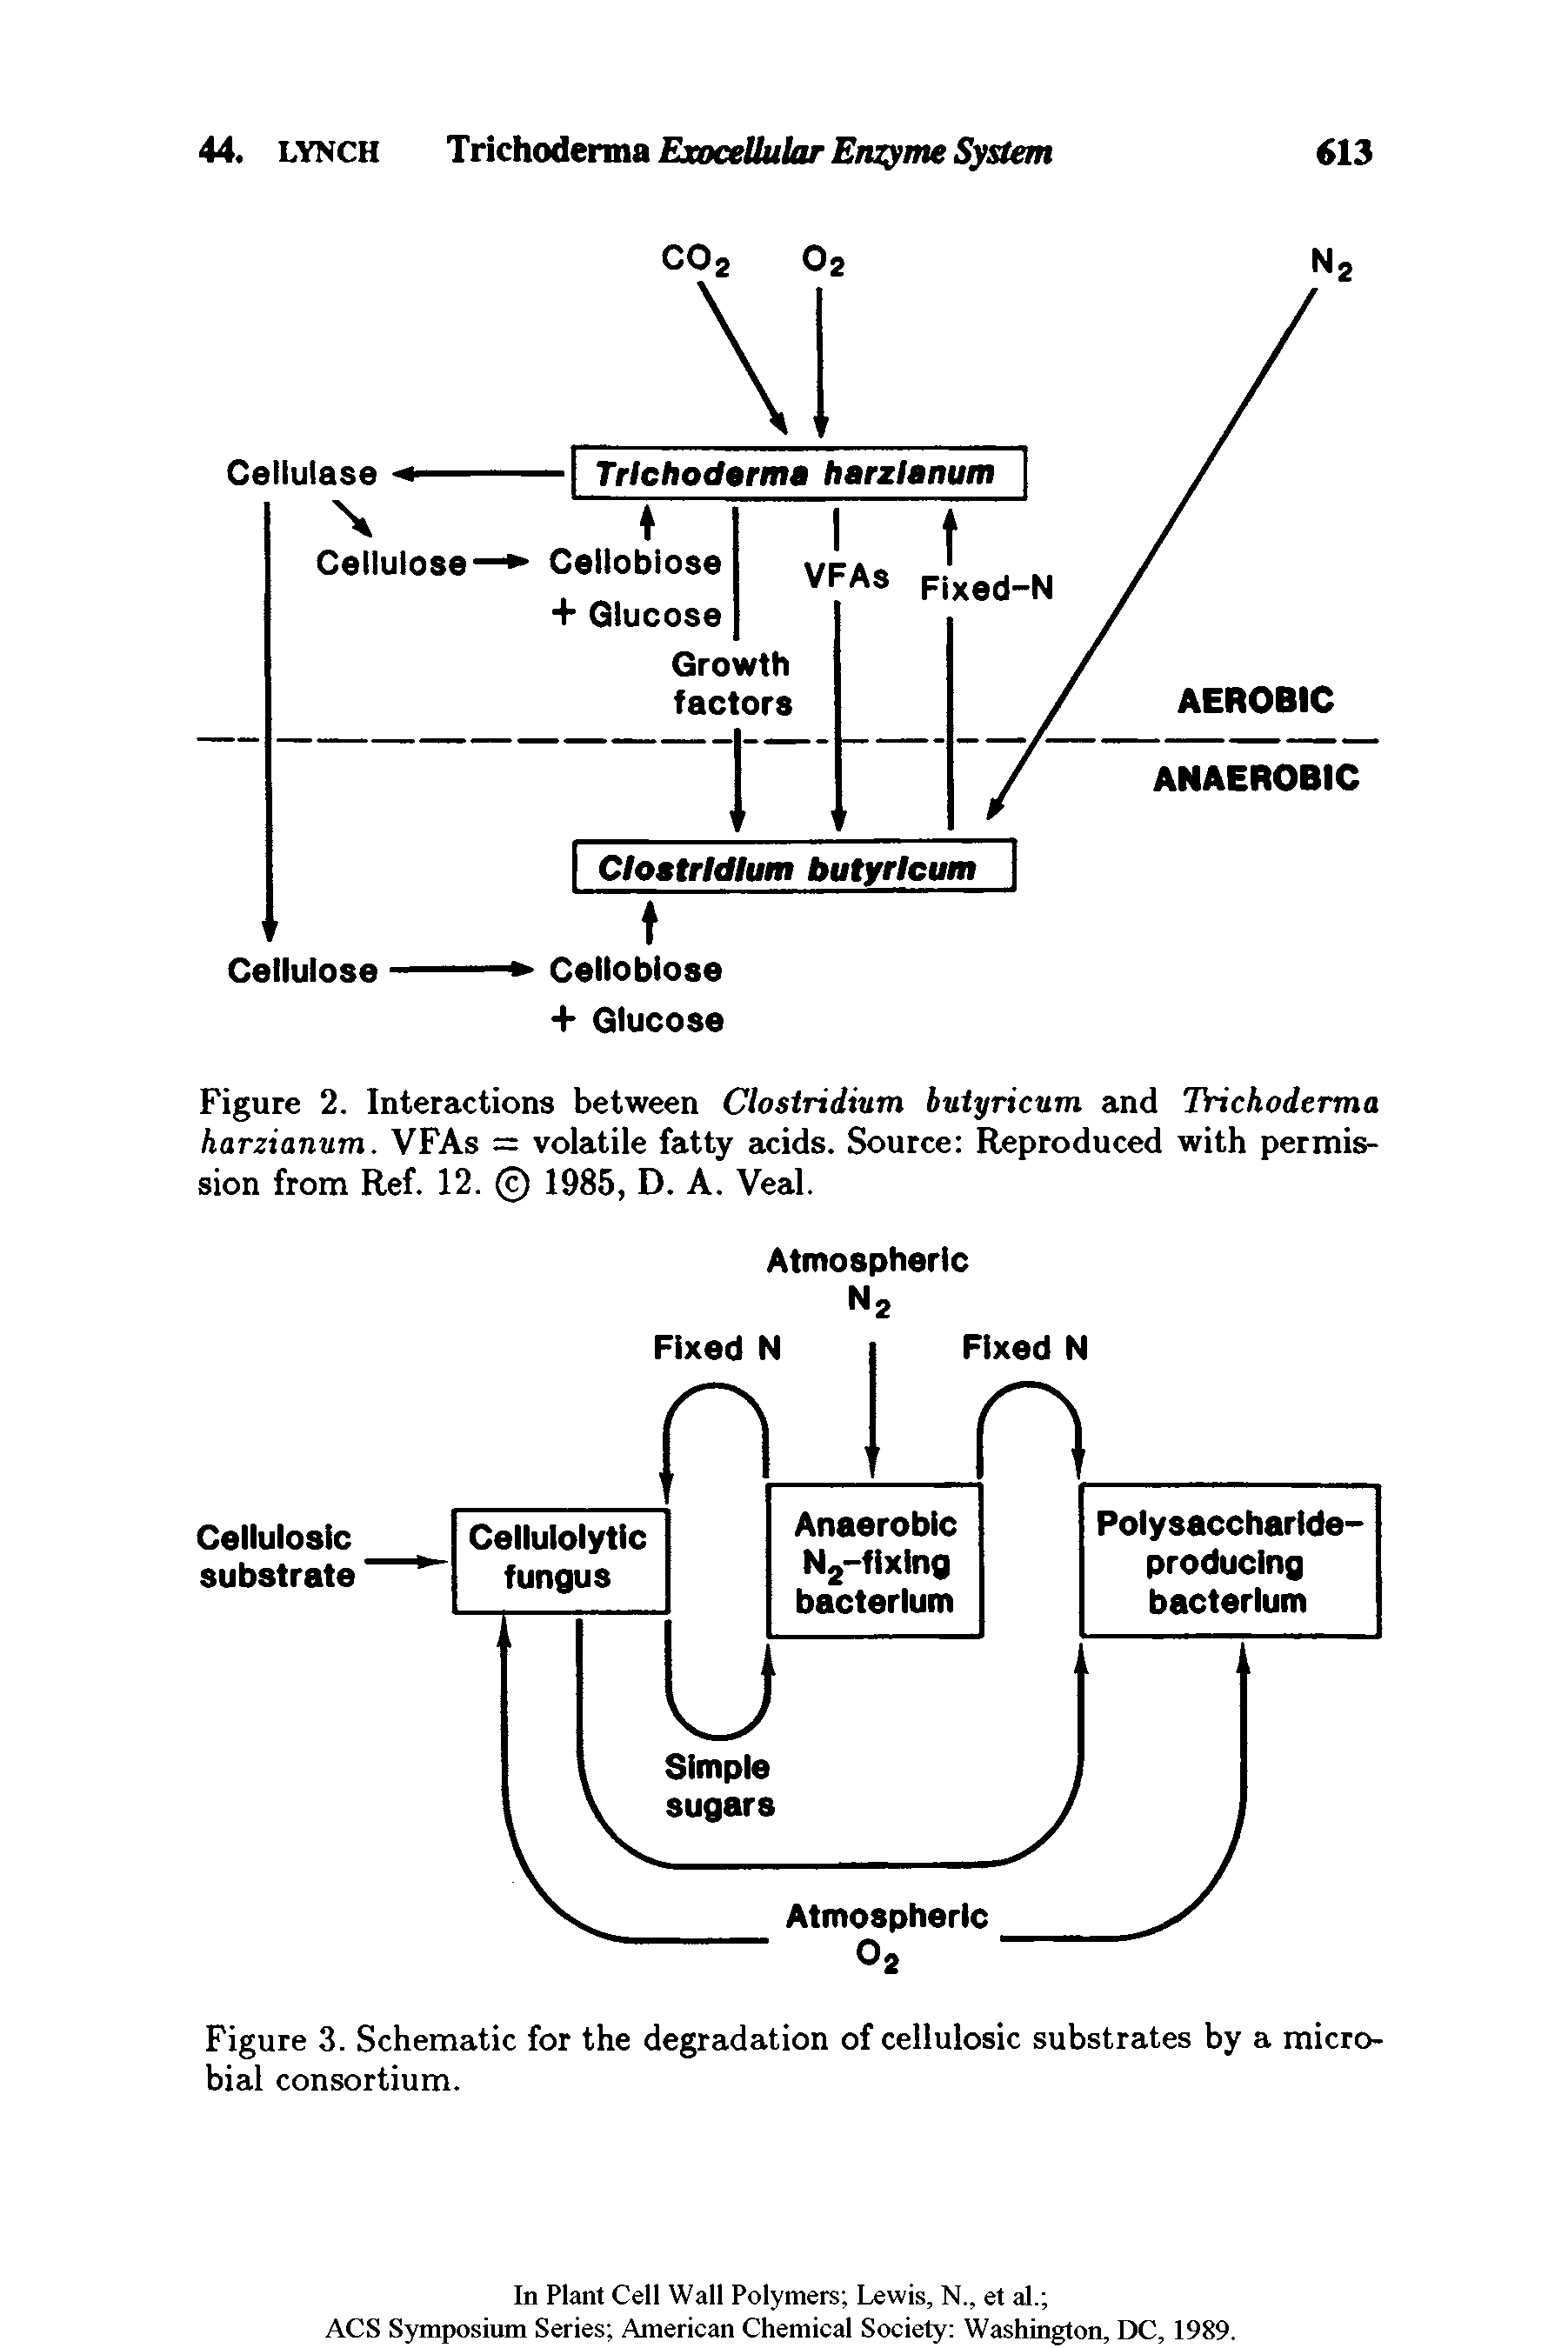 Figure 2. Interactions between Clostridium butyricum and Trichoderma harzianum. VFAs = volatile fatty acids. Source Reproduced with permission from Ref. 12. 1985, D. A. Veal.